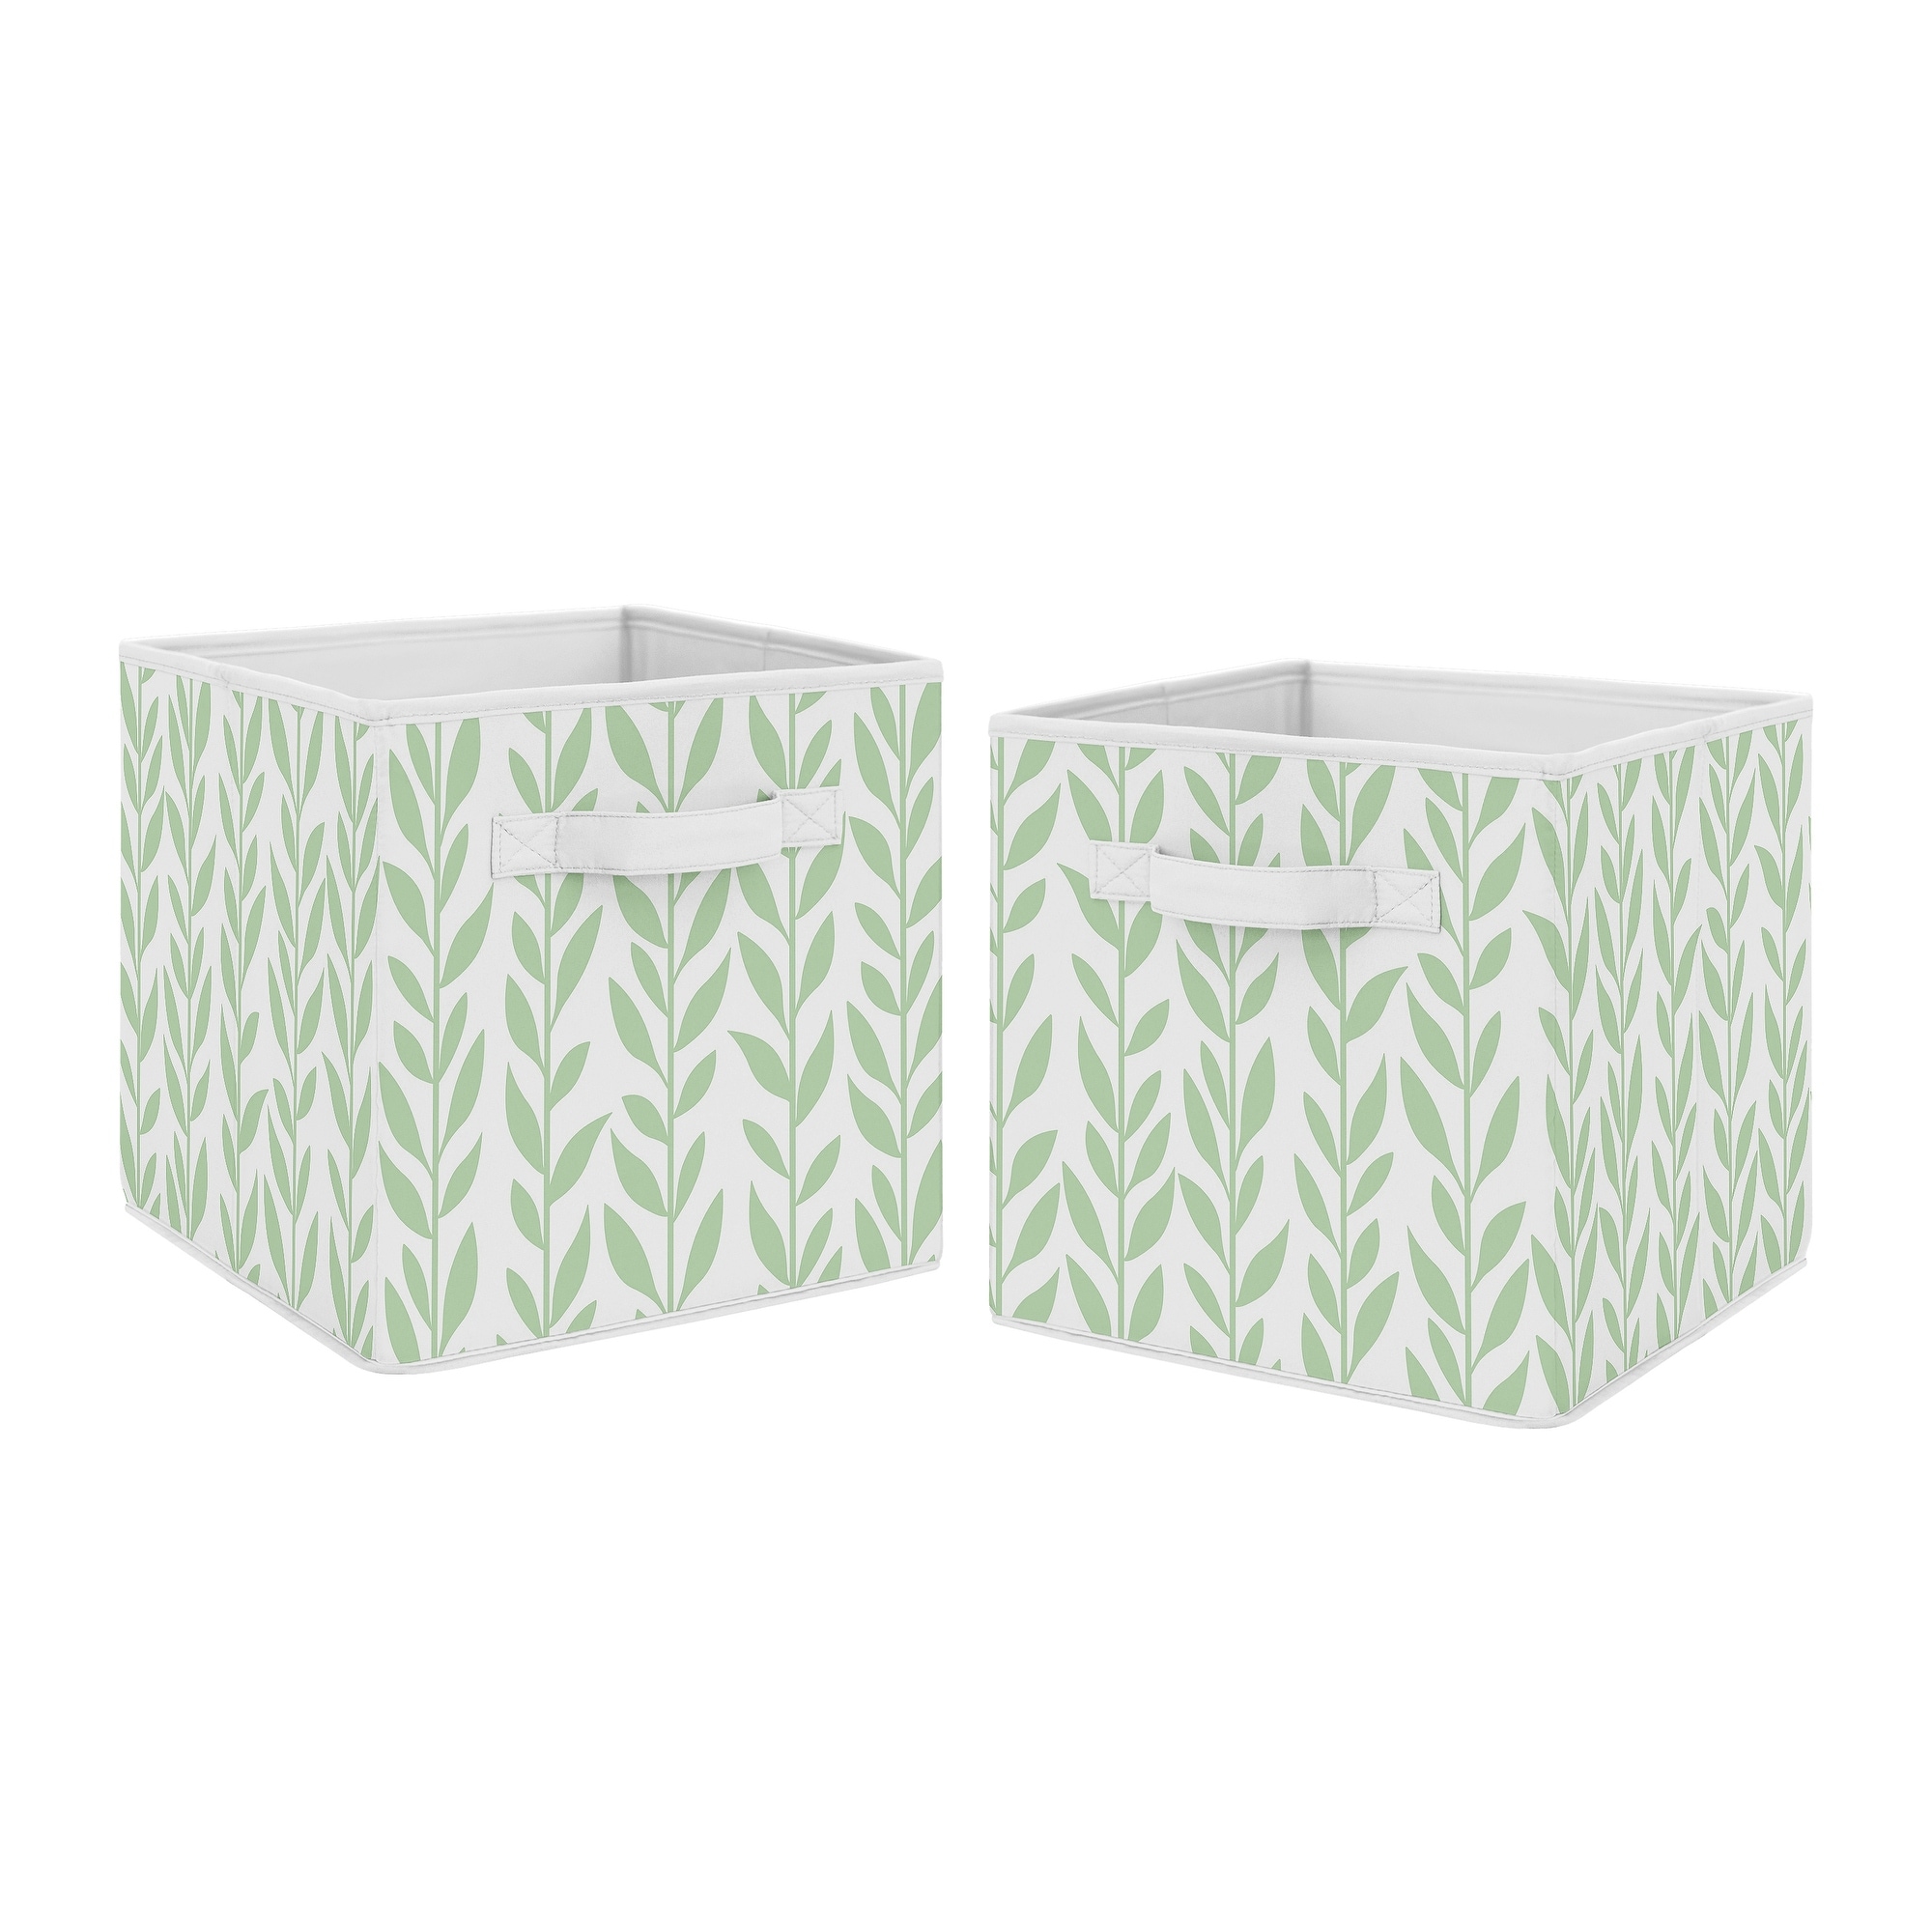 https://ak1.ostkcdn.com/images/products/is/images/direct/fe7eed8cc811461b6b6ad2fd6e843ee88c297f79/Green-and-White-Floral-Leaf-Foldable-Fabric-Storage-Bins---for-the-Boho-Farmhouse-Sunflower-Collection.jpg